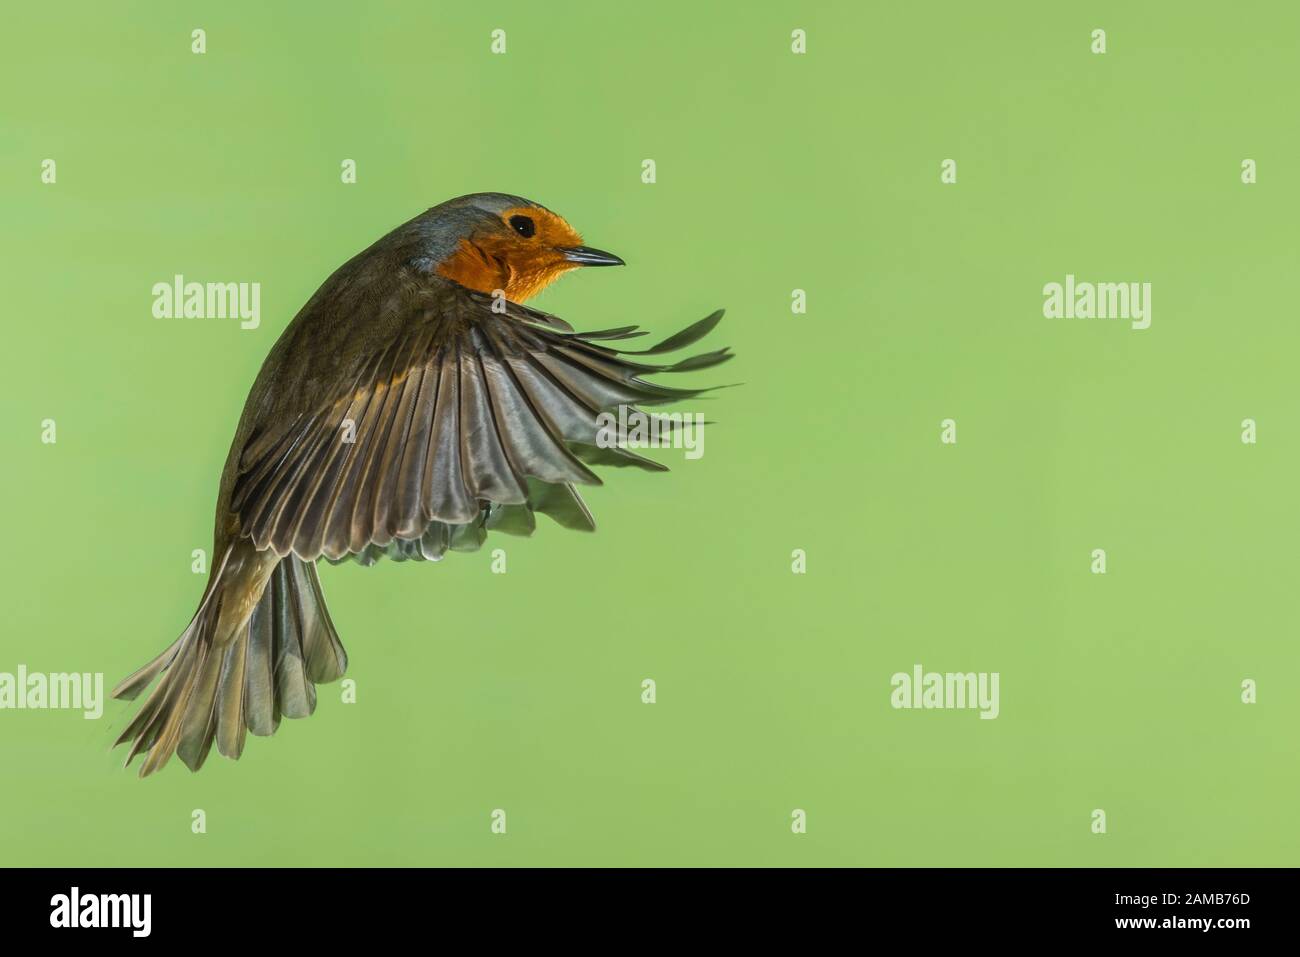 A Robin (Erithacus rubecula) photographed using High speed flash in free flight in the Uk Stock Photo